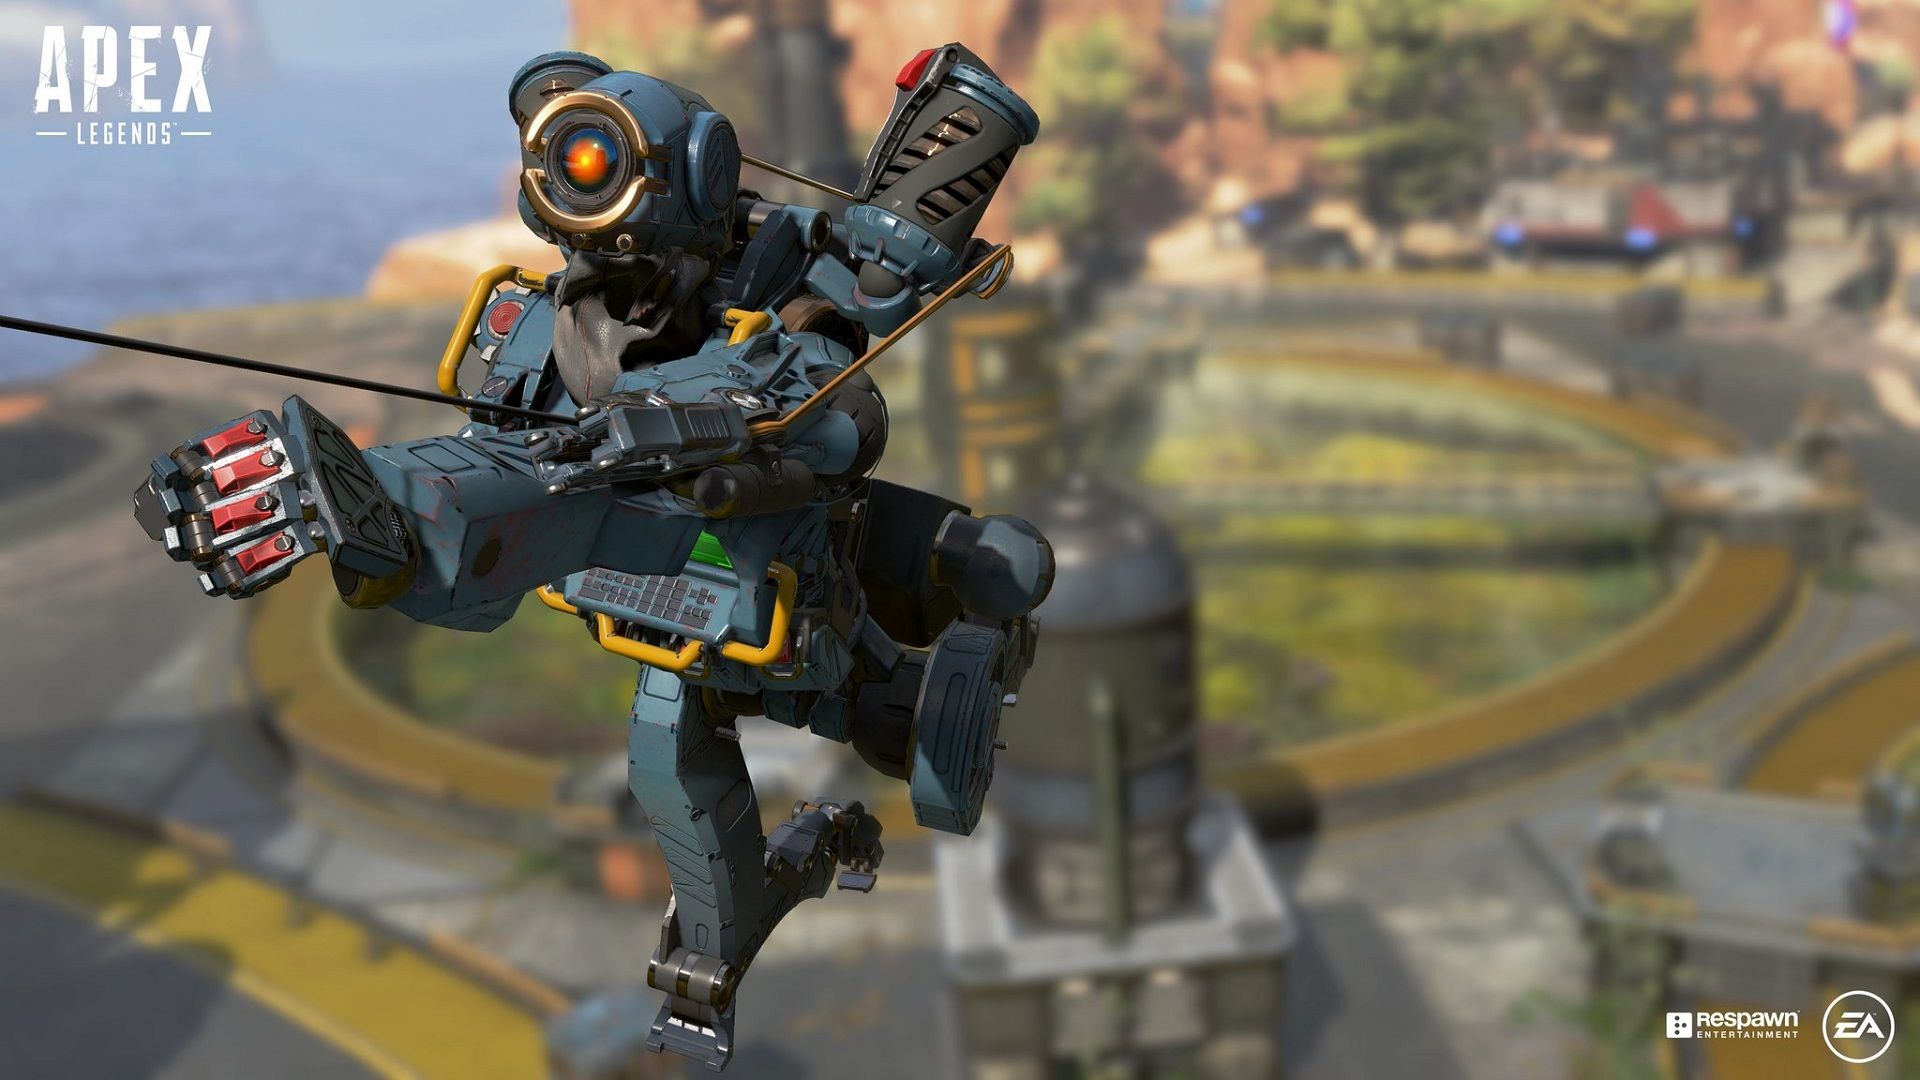 Apex Legends mobile edition could be announced as soon as E3 2019 image 1